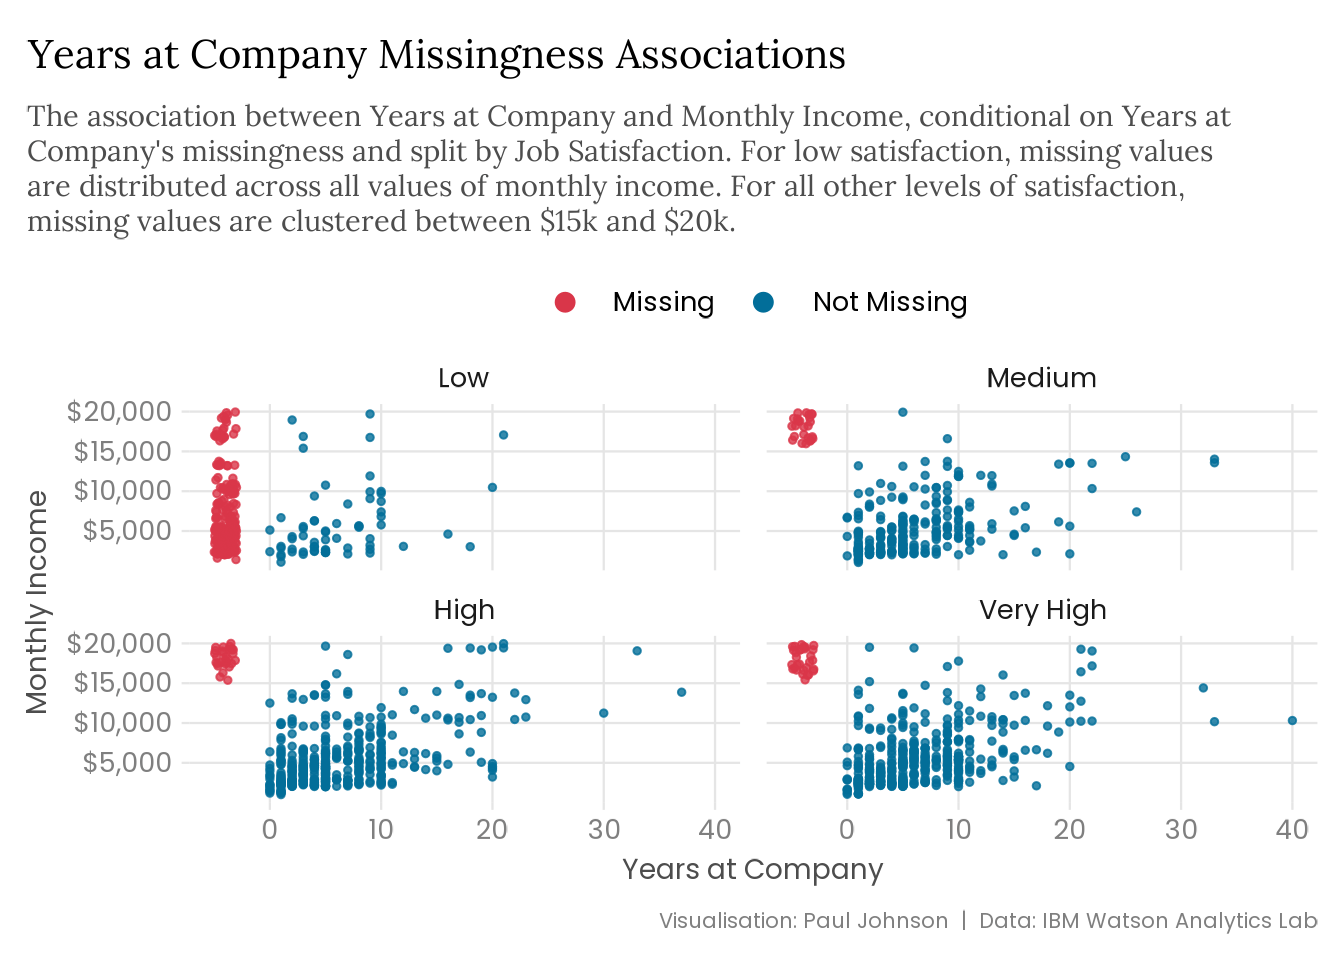 A grid of four scatter plots showing the association between years at company and monthly income, conditional on whether years at company is missing or not and split by job satisfaction. The four plots show a noisy but positive relationship between years at copany and monthly income, and for medium, high, and very high job satisfaction there is a cluster of missing values between $15000 and $20000. For low job satisfaction, there are much more missing values, making up the majority of the observations in this scatter plot, and they cover the full range of monthly incomes, from below $5000 to $20000. 